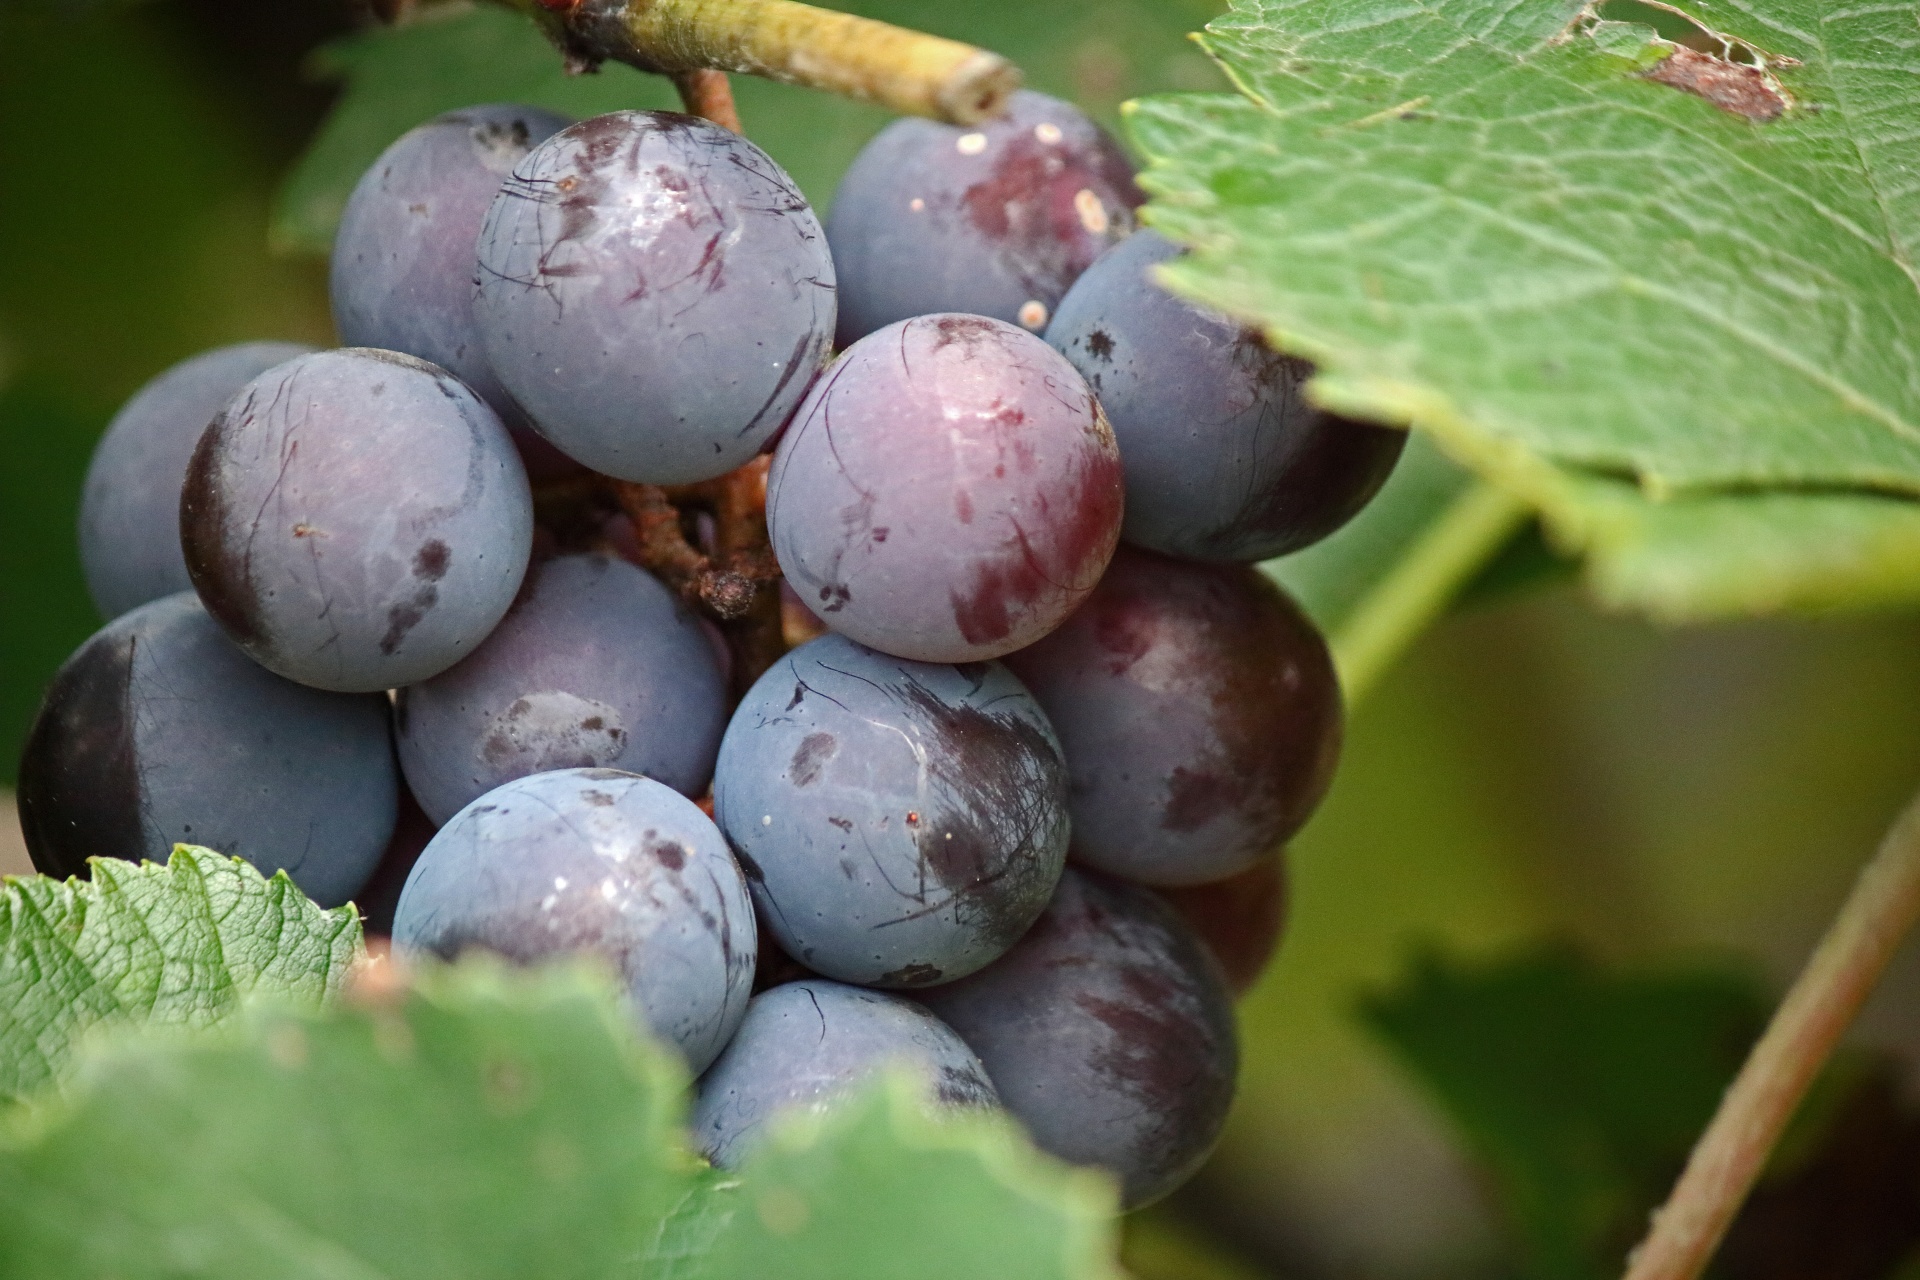 ripening bunch of grapes on a vine with green leaves in a garden